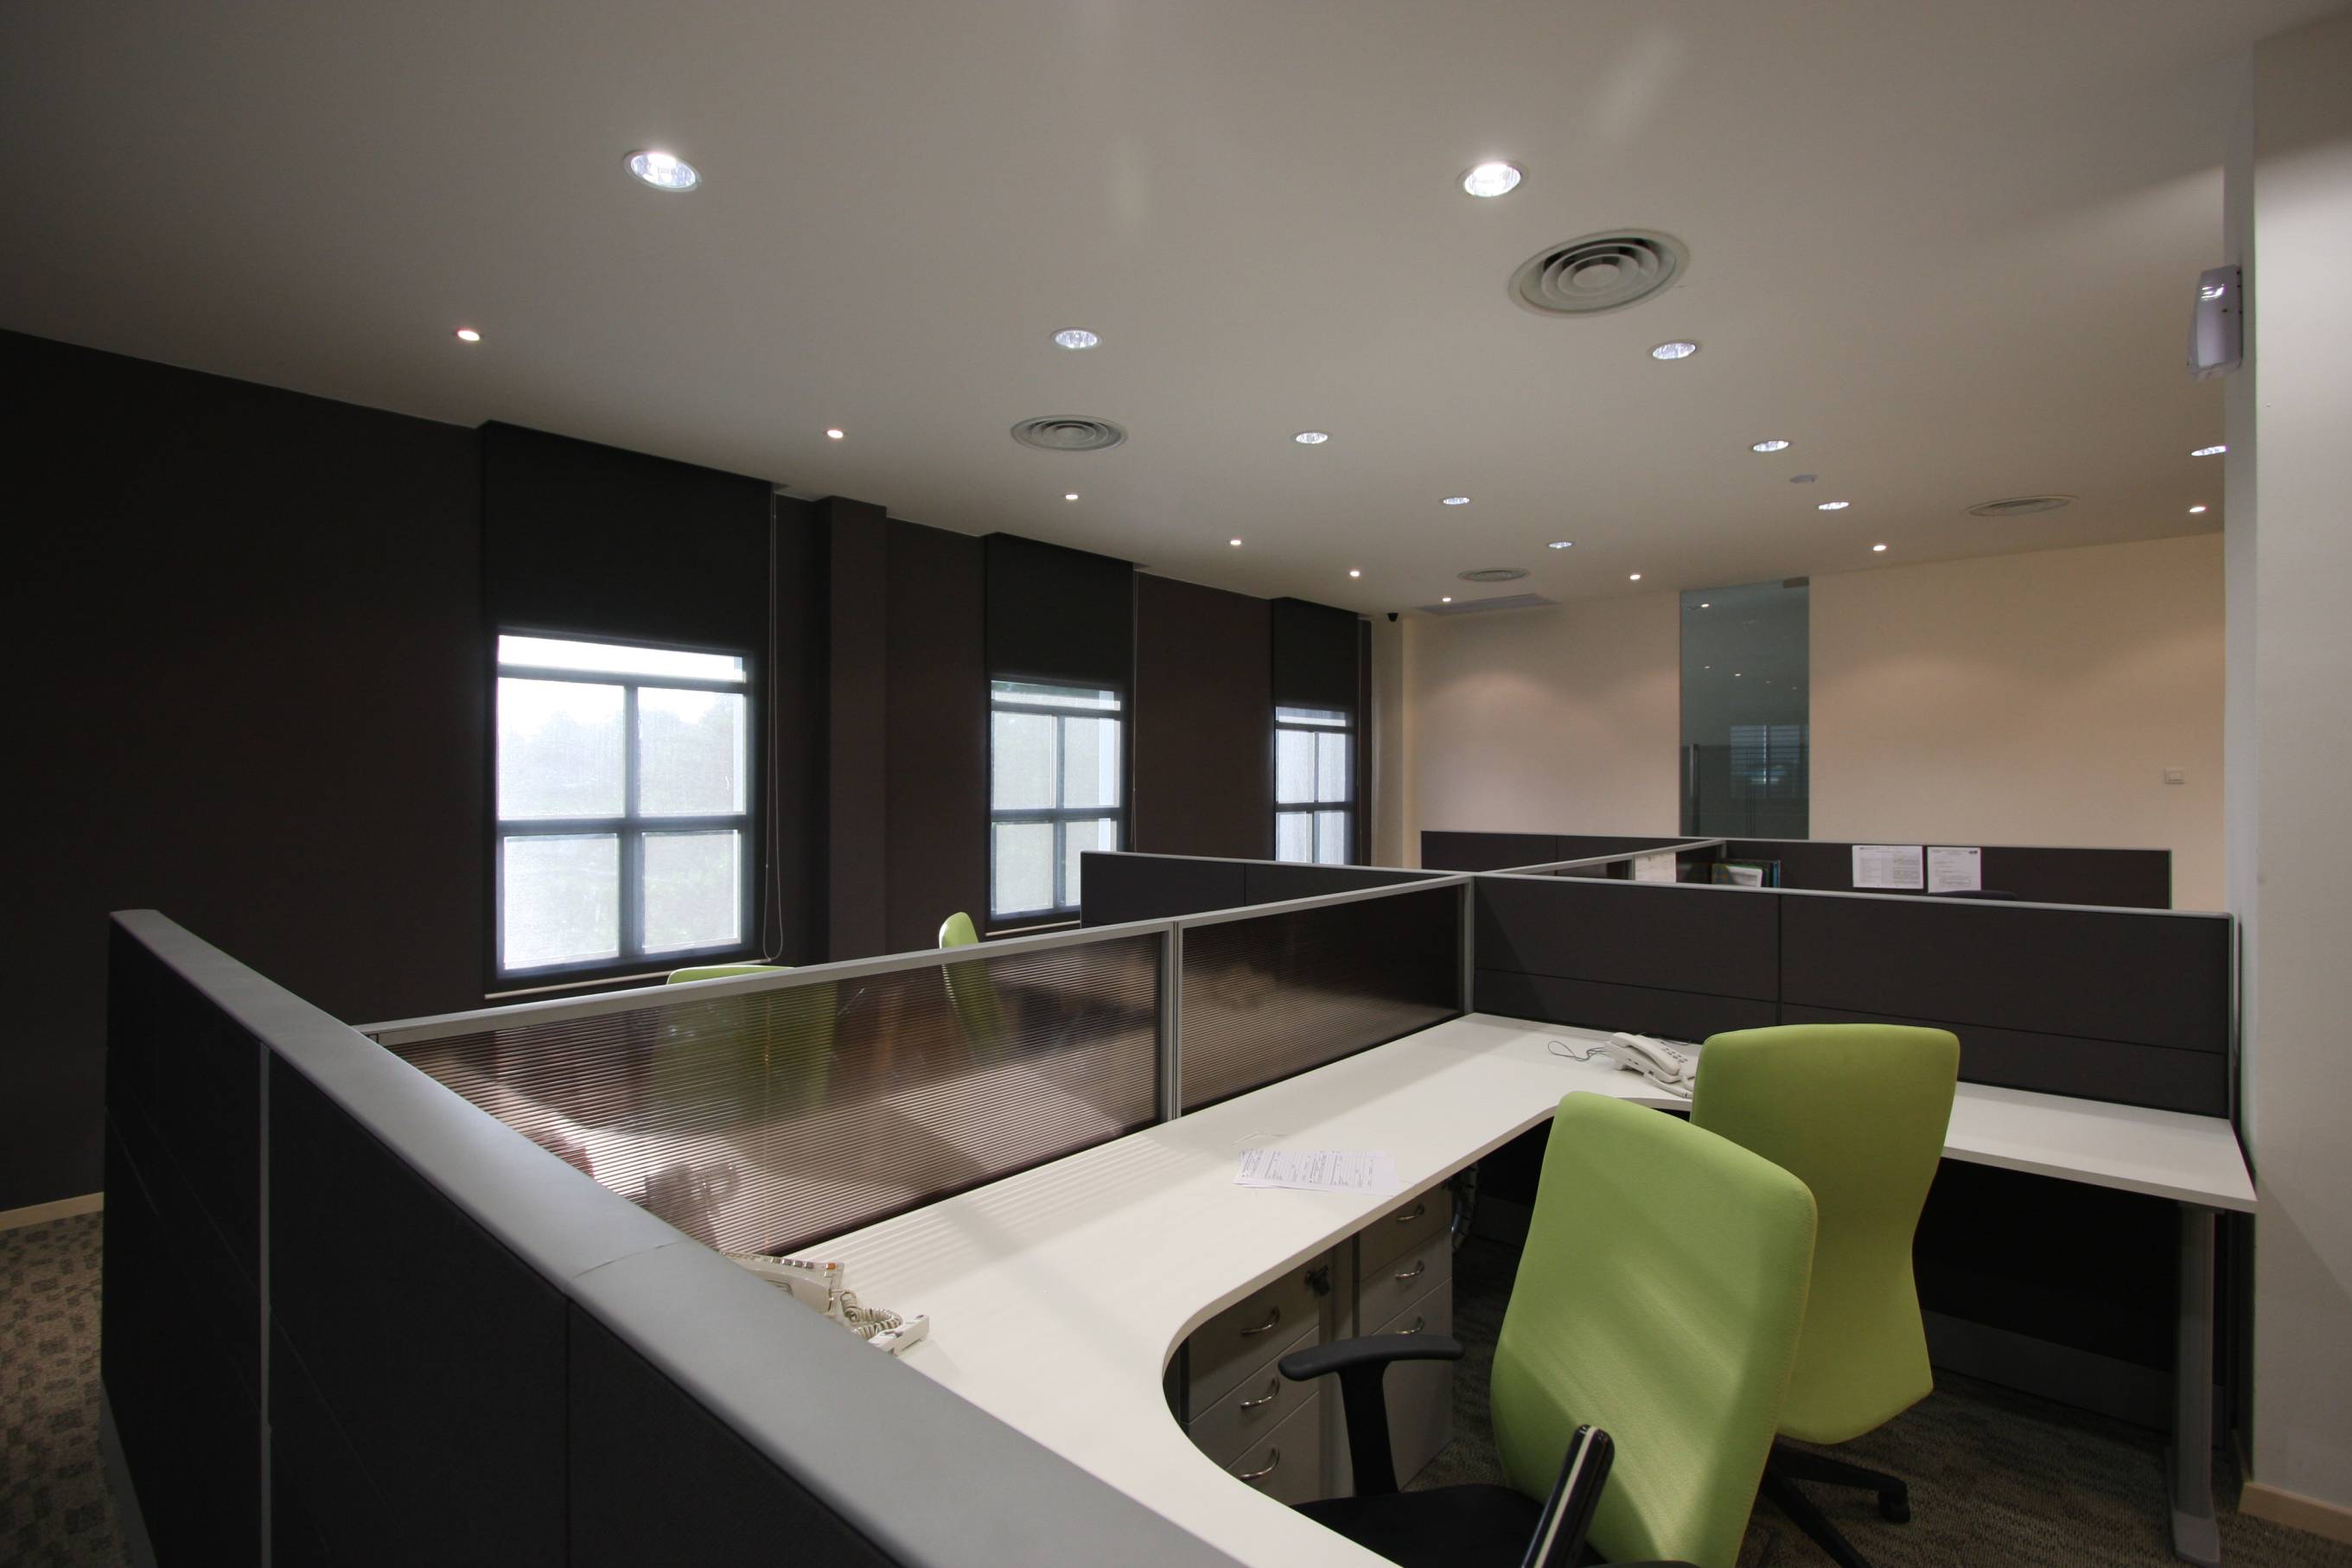 Modern and Functional Office-16026441525.jpg